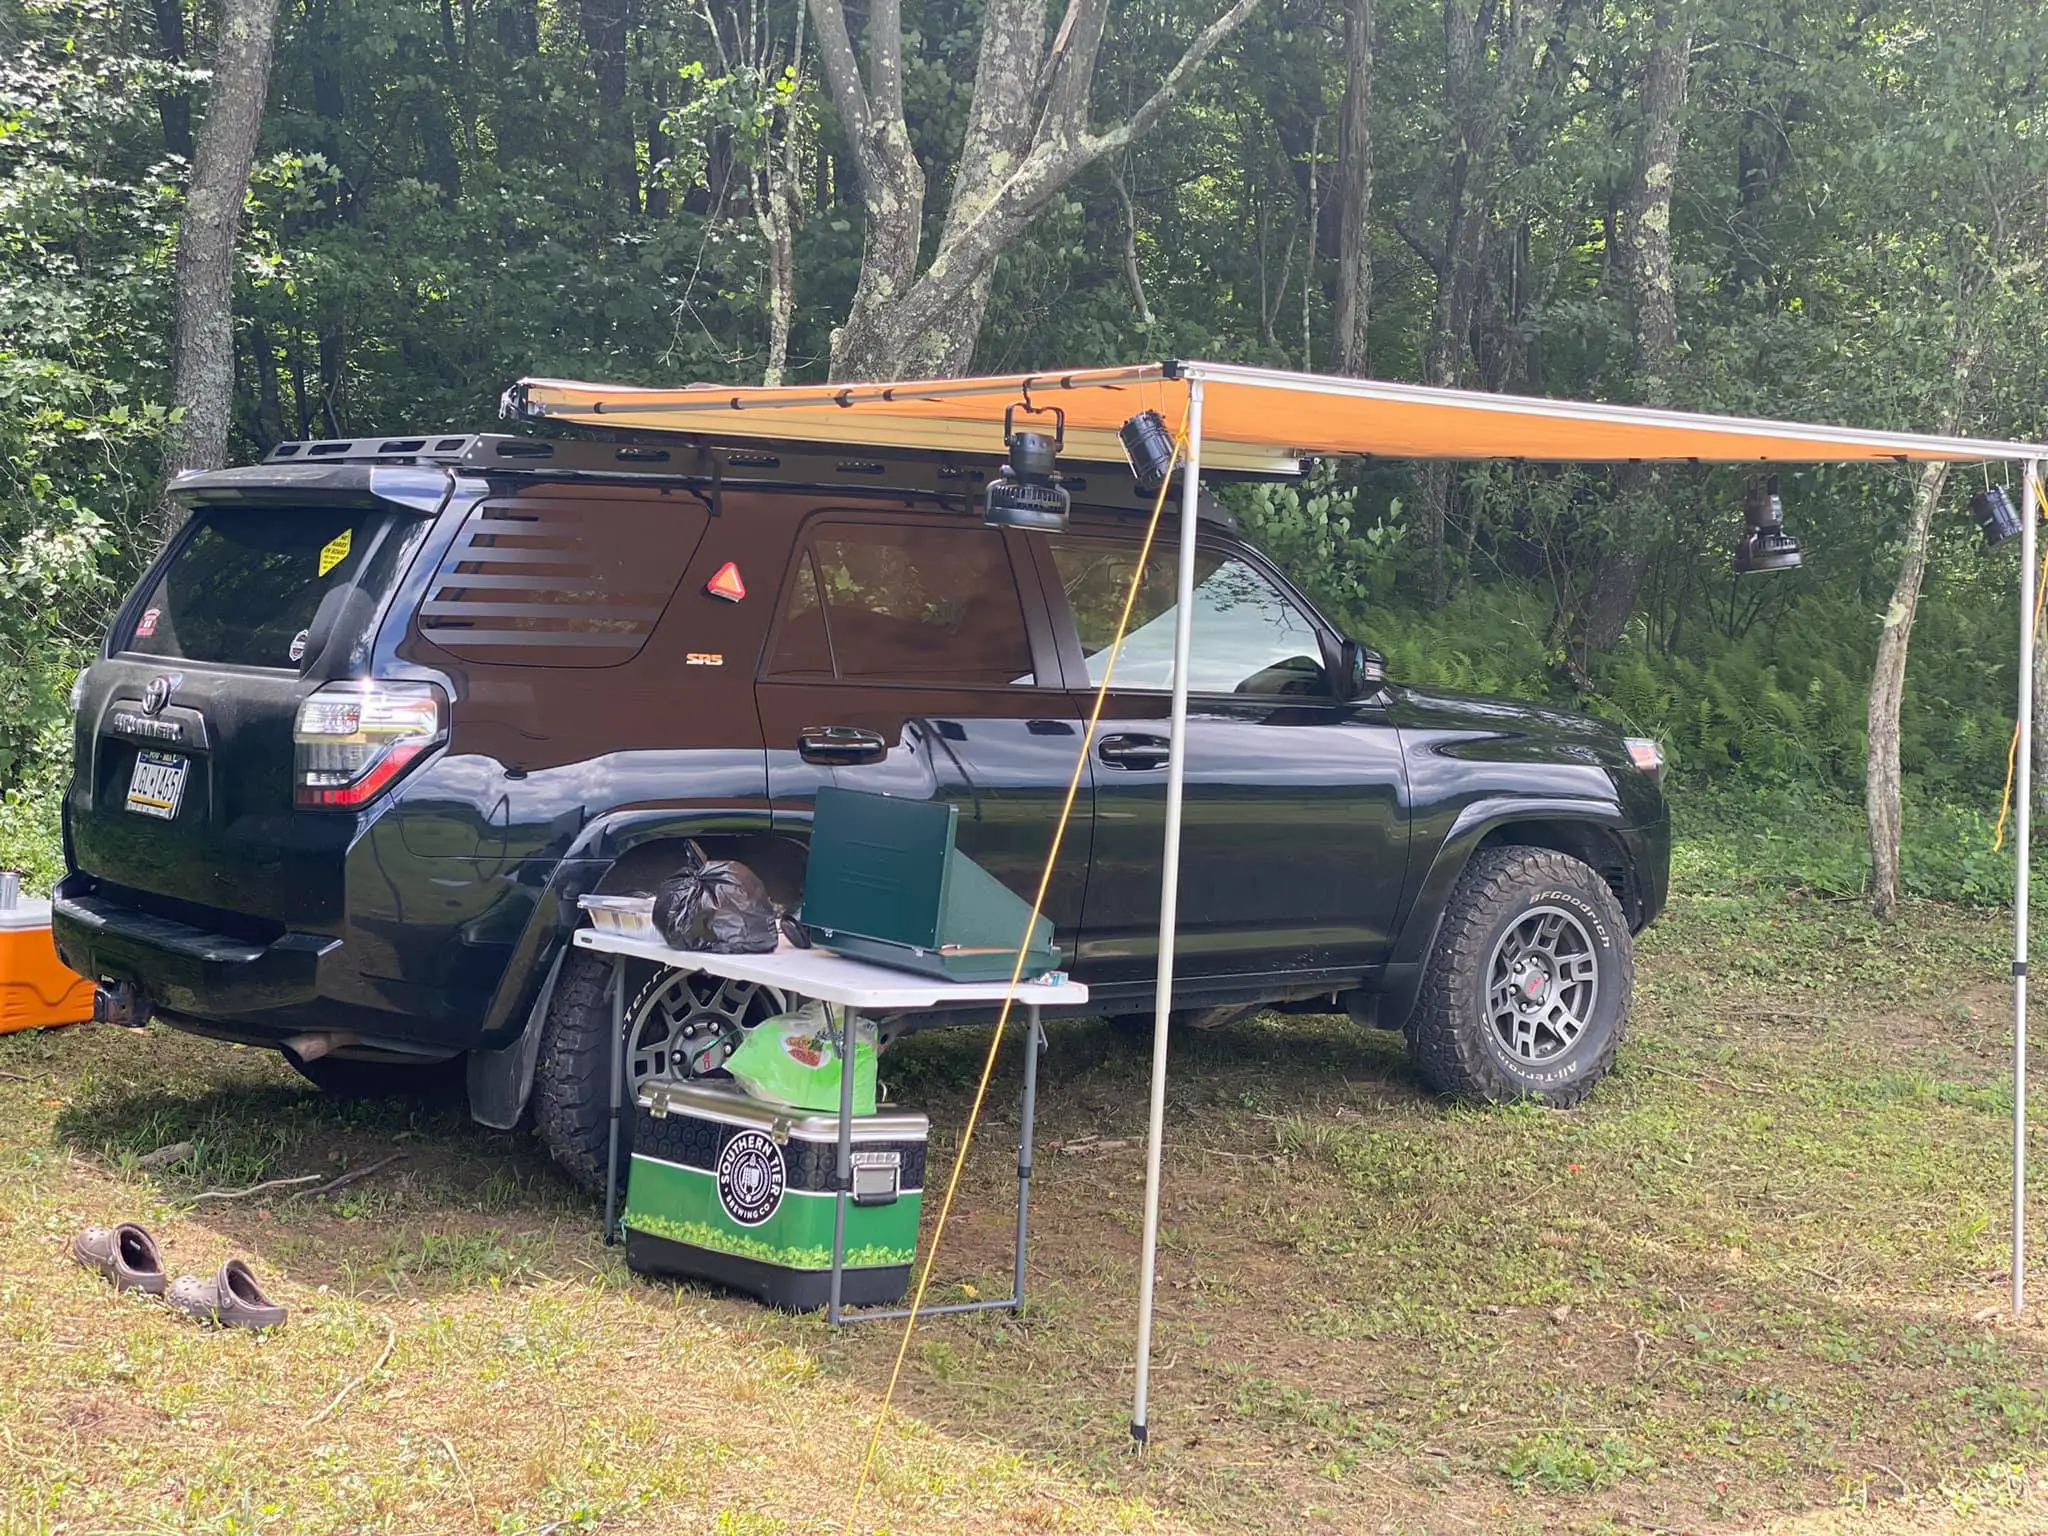 Toyota 4Runner For Stealth Camping – Our Thoughts